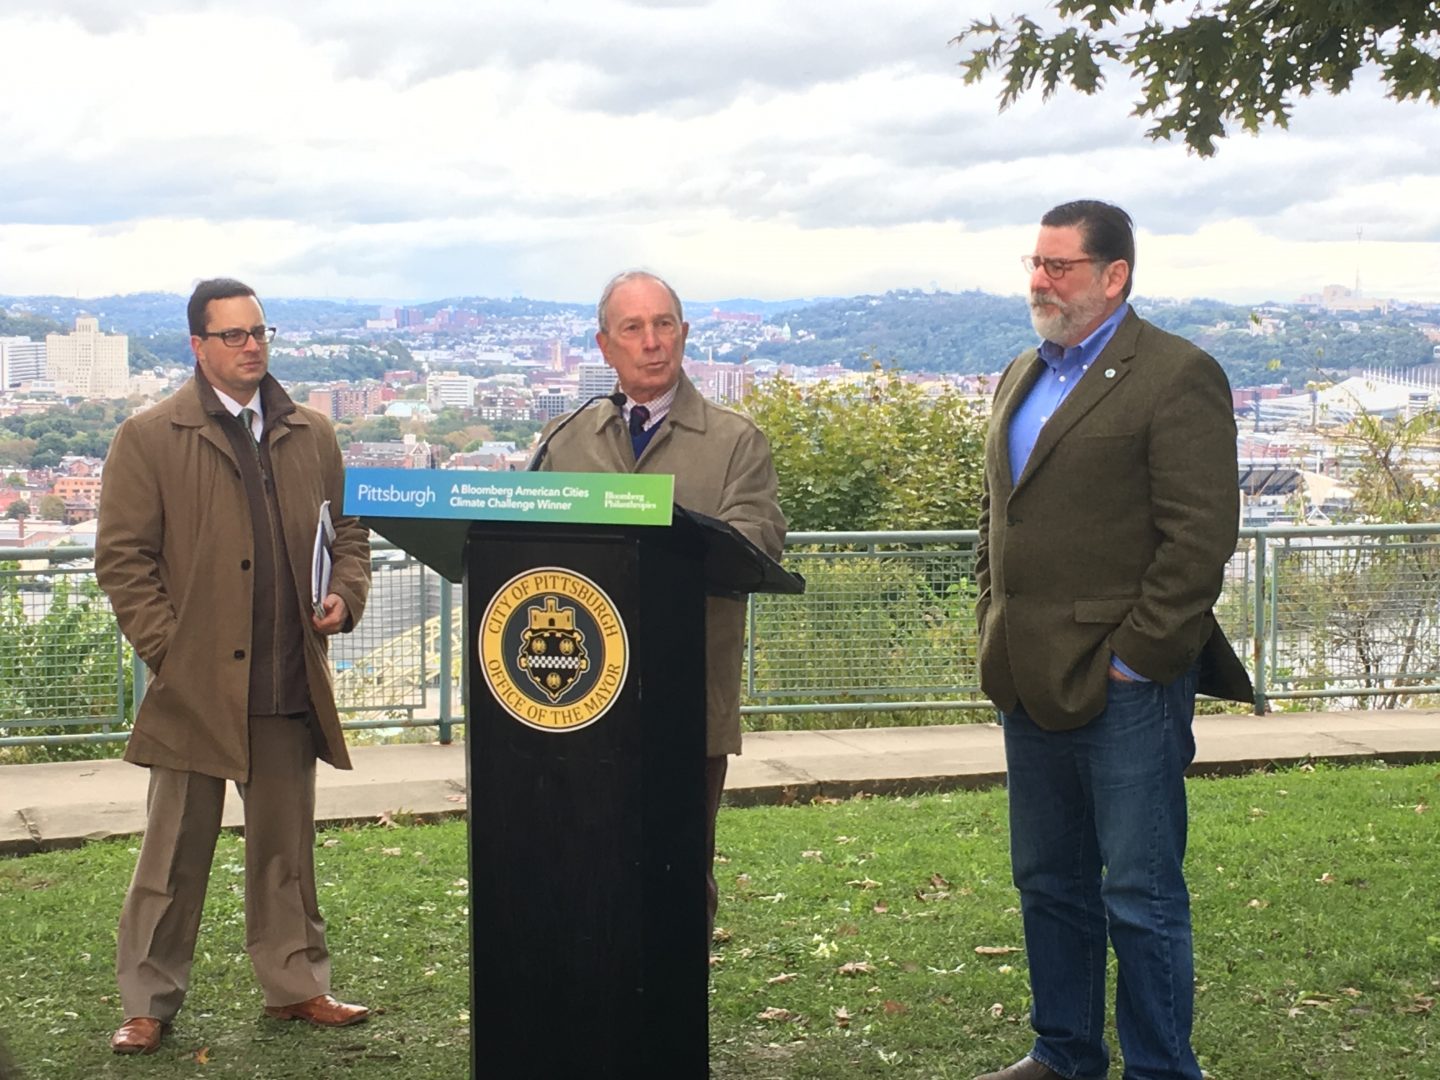 Former New York City Mayor Michael Bloomberg (center) appeared with Pittsburgh’s Chief Resilience Officer Grant Ervin (left) and Pittsburgh Mayor Bill Peduto at West End-Elliott Overlook Park on Sunday.